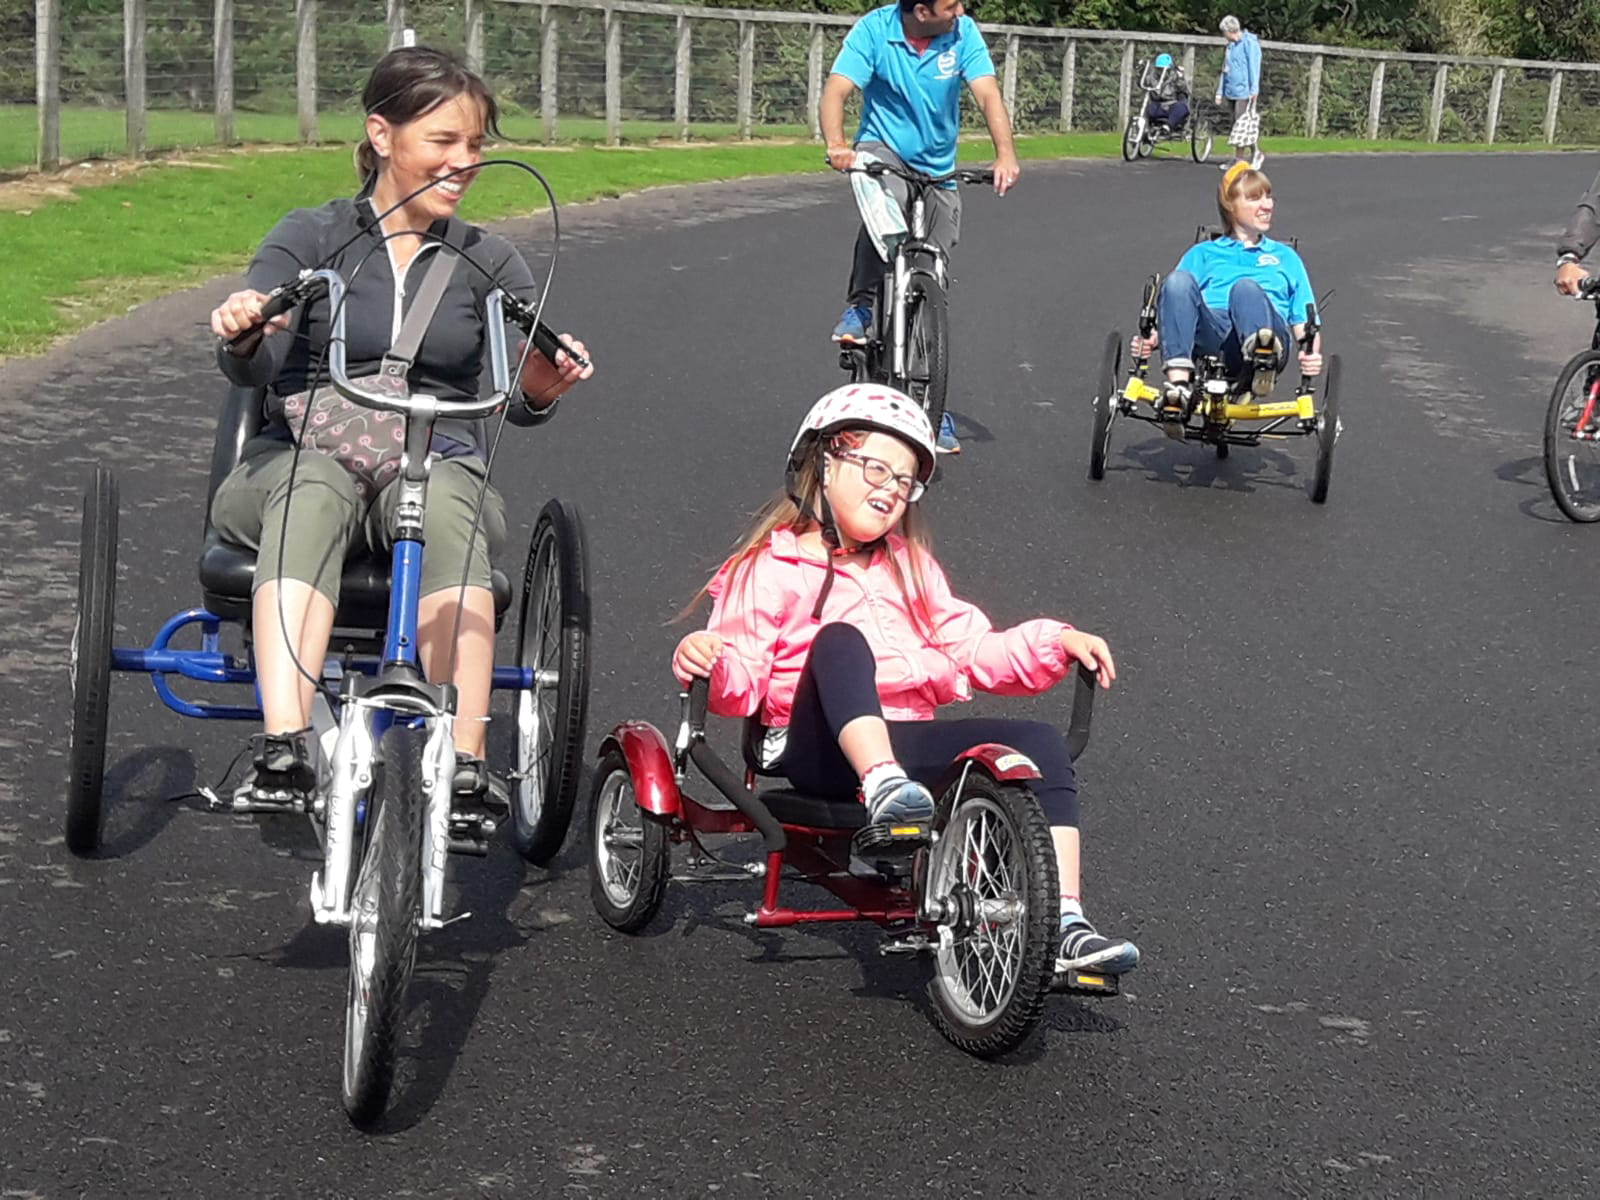 A learning disabled child on a tricycle on a outdoor track with others - she is wearing a pink coat and crash helmet. She has a look of joy and concentration as she squints into the sun. To her left is a smiling adult carer, also on a tricycle